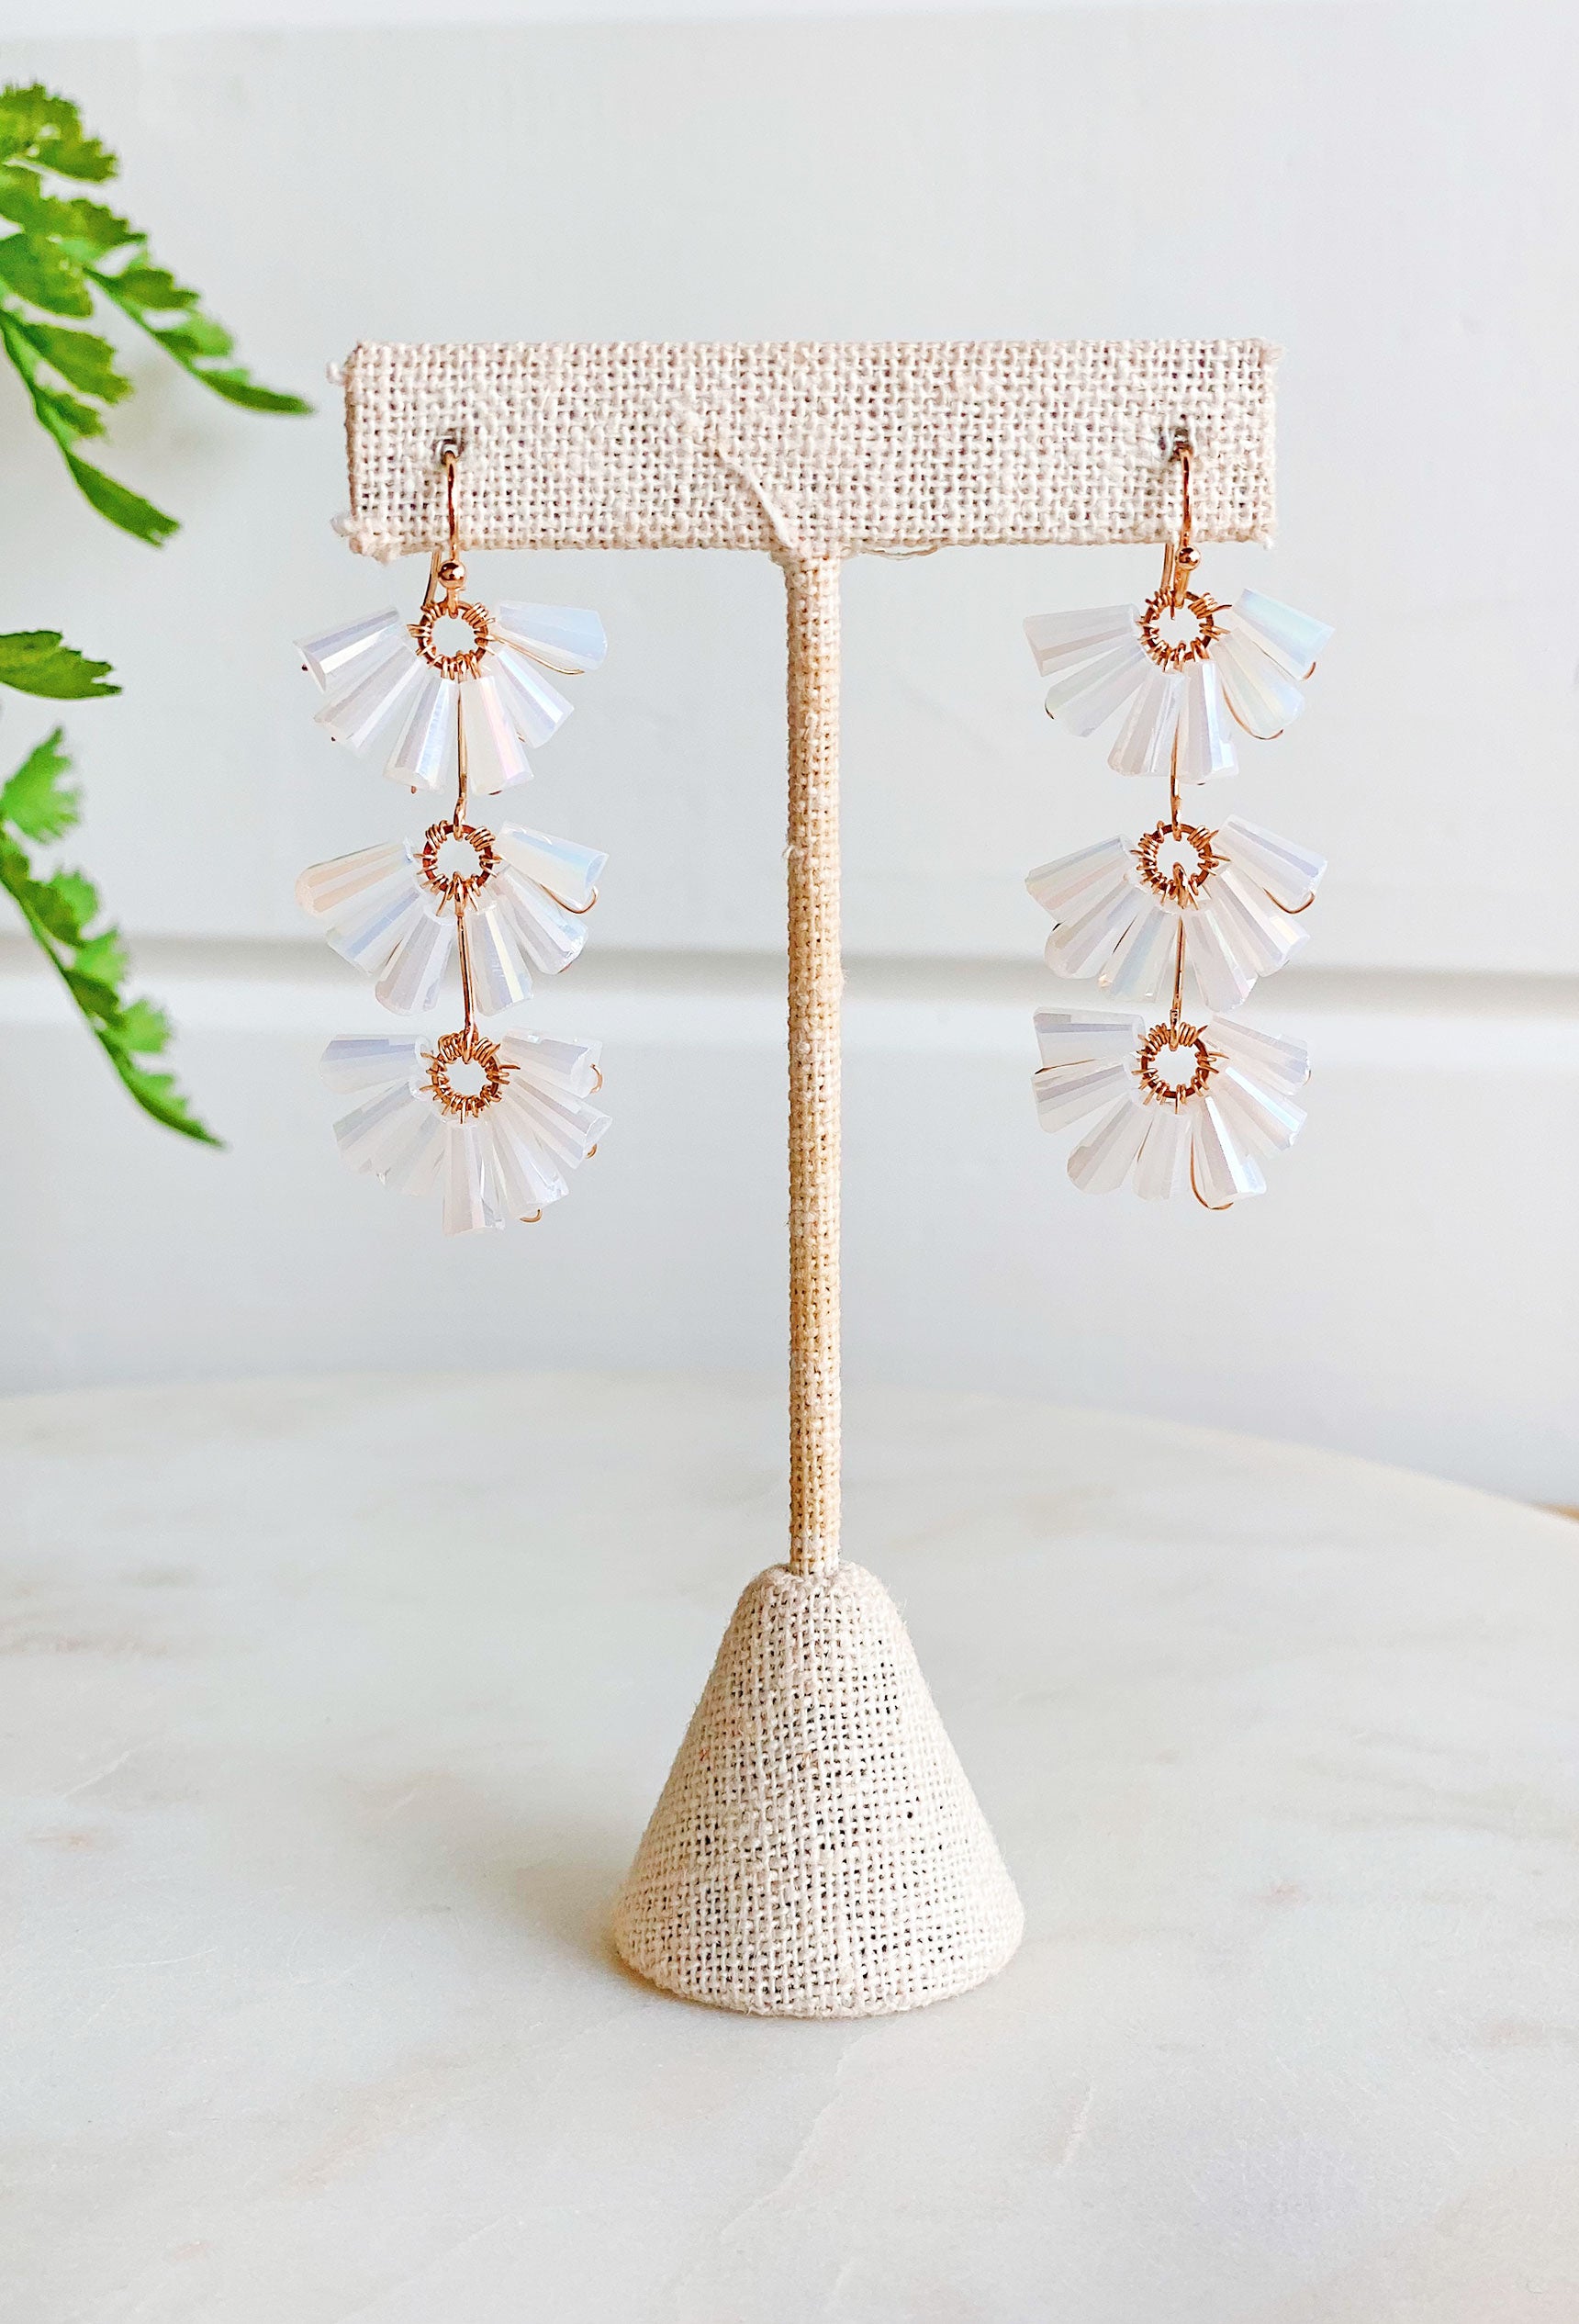 Sarah Drop Earrings in White, drop earrings with white fanned out crystals